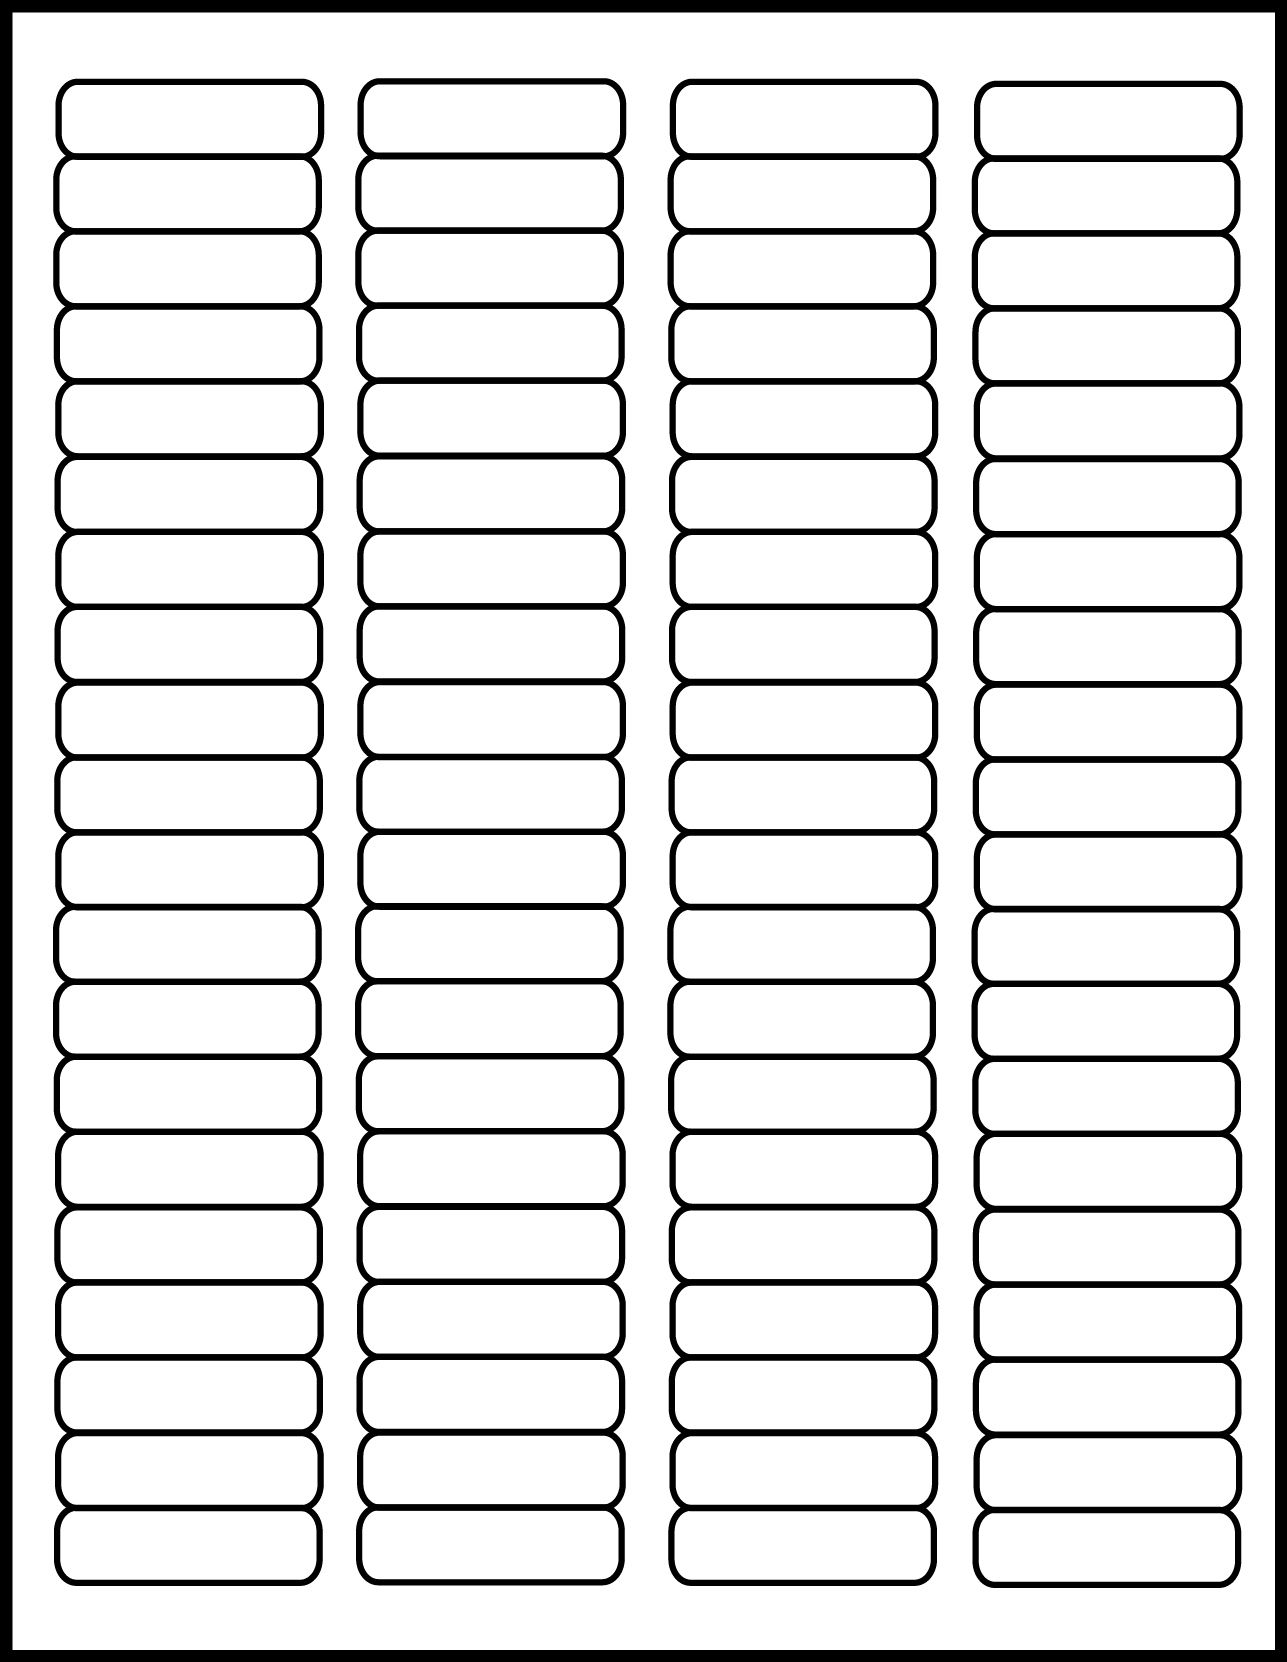 Avery templates 5167 labels